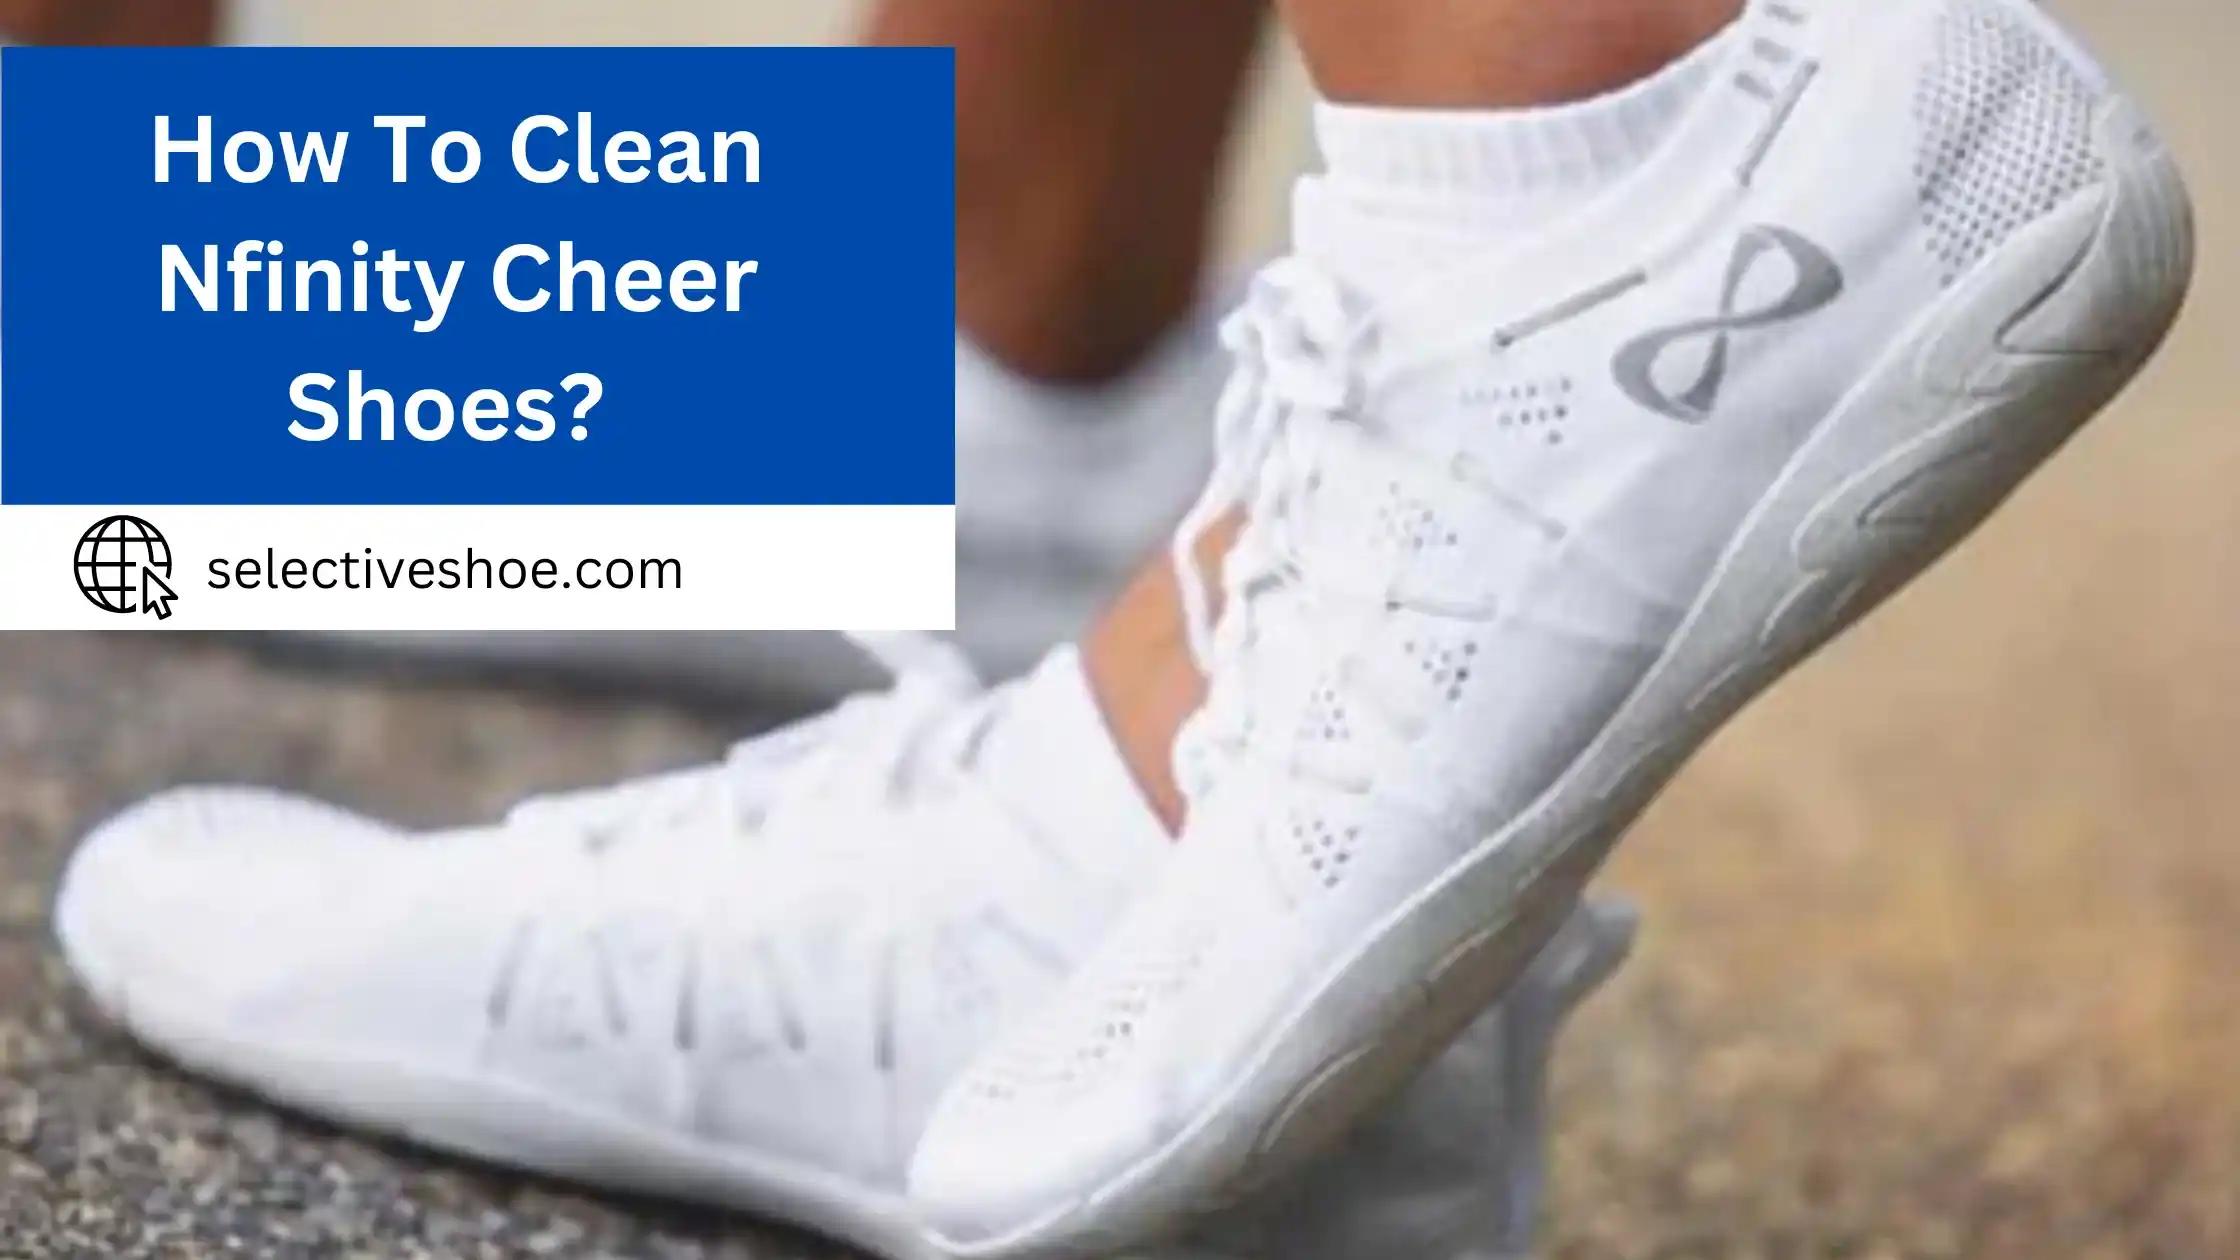 How To Clean Nfinity Cheer Shoes? Easy Guide For Everyone